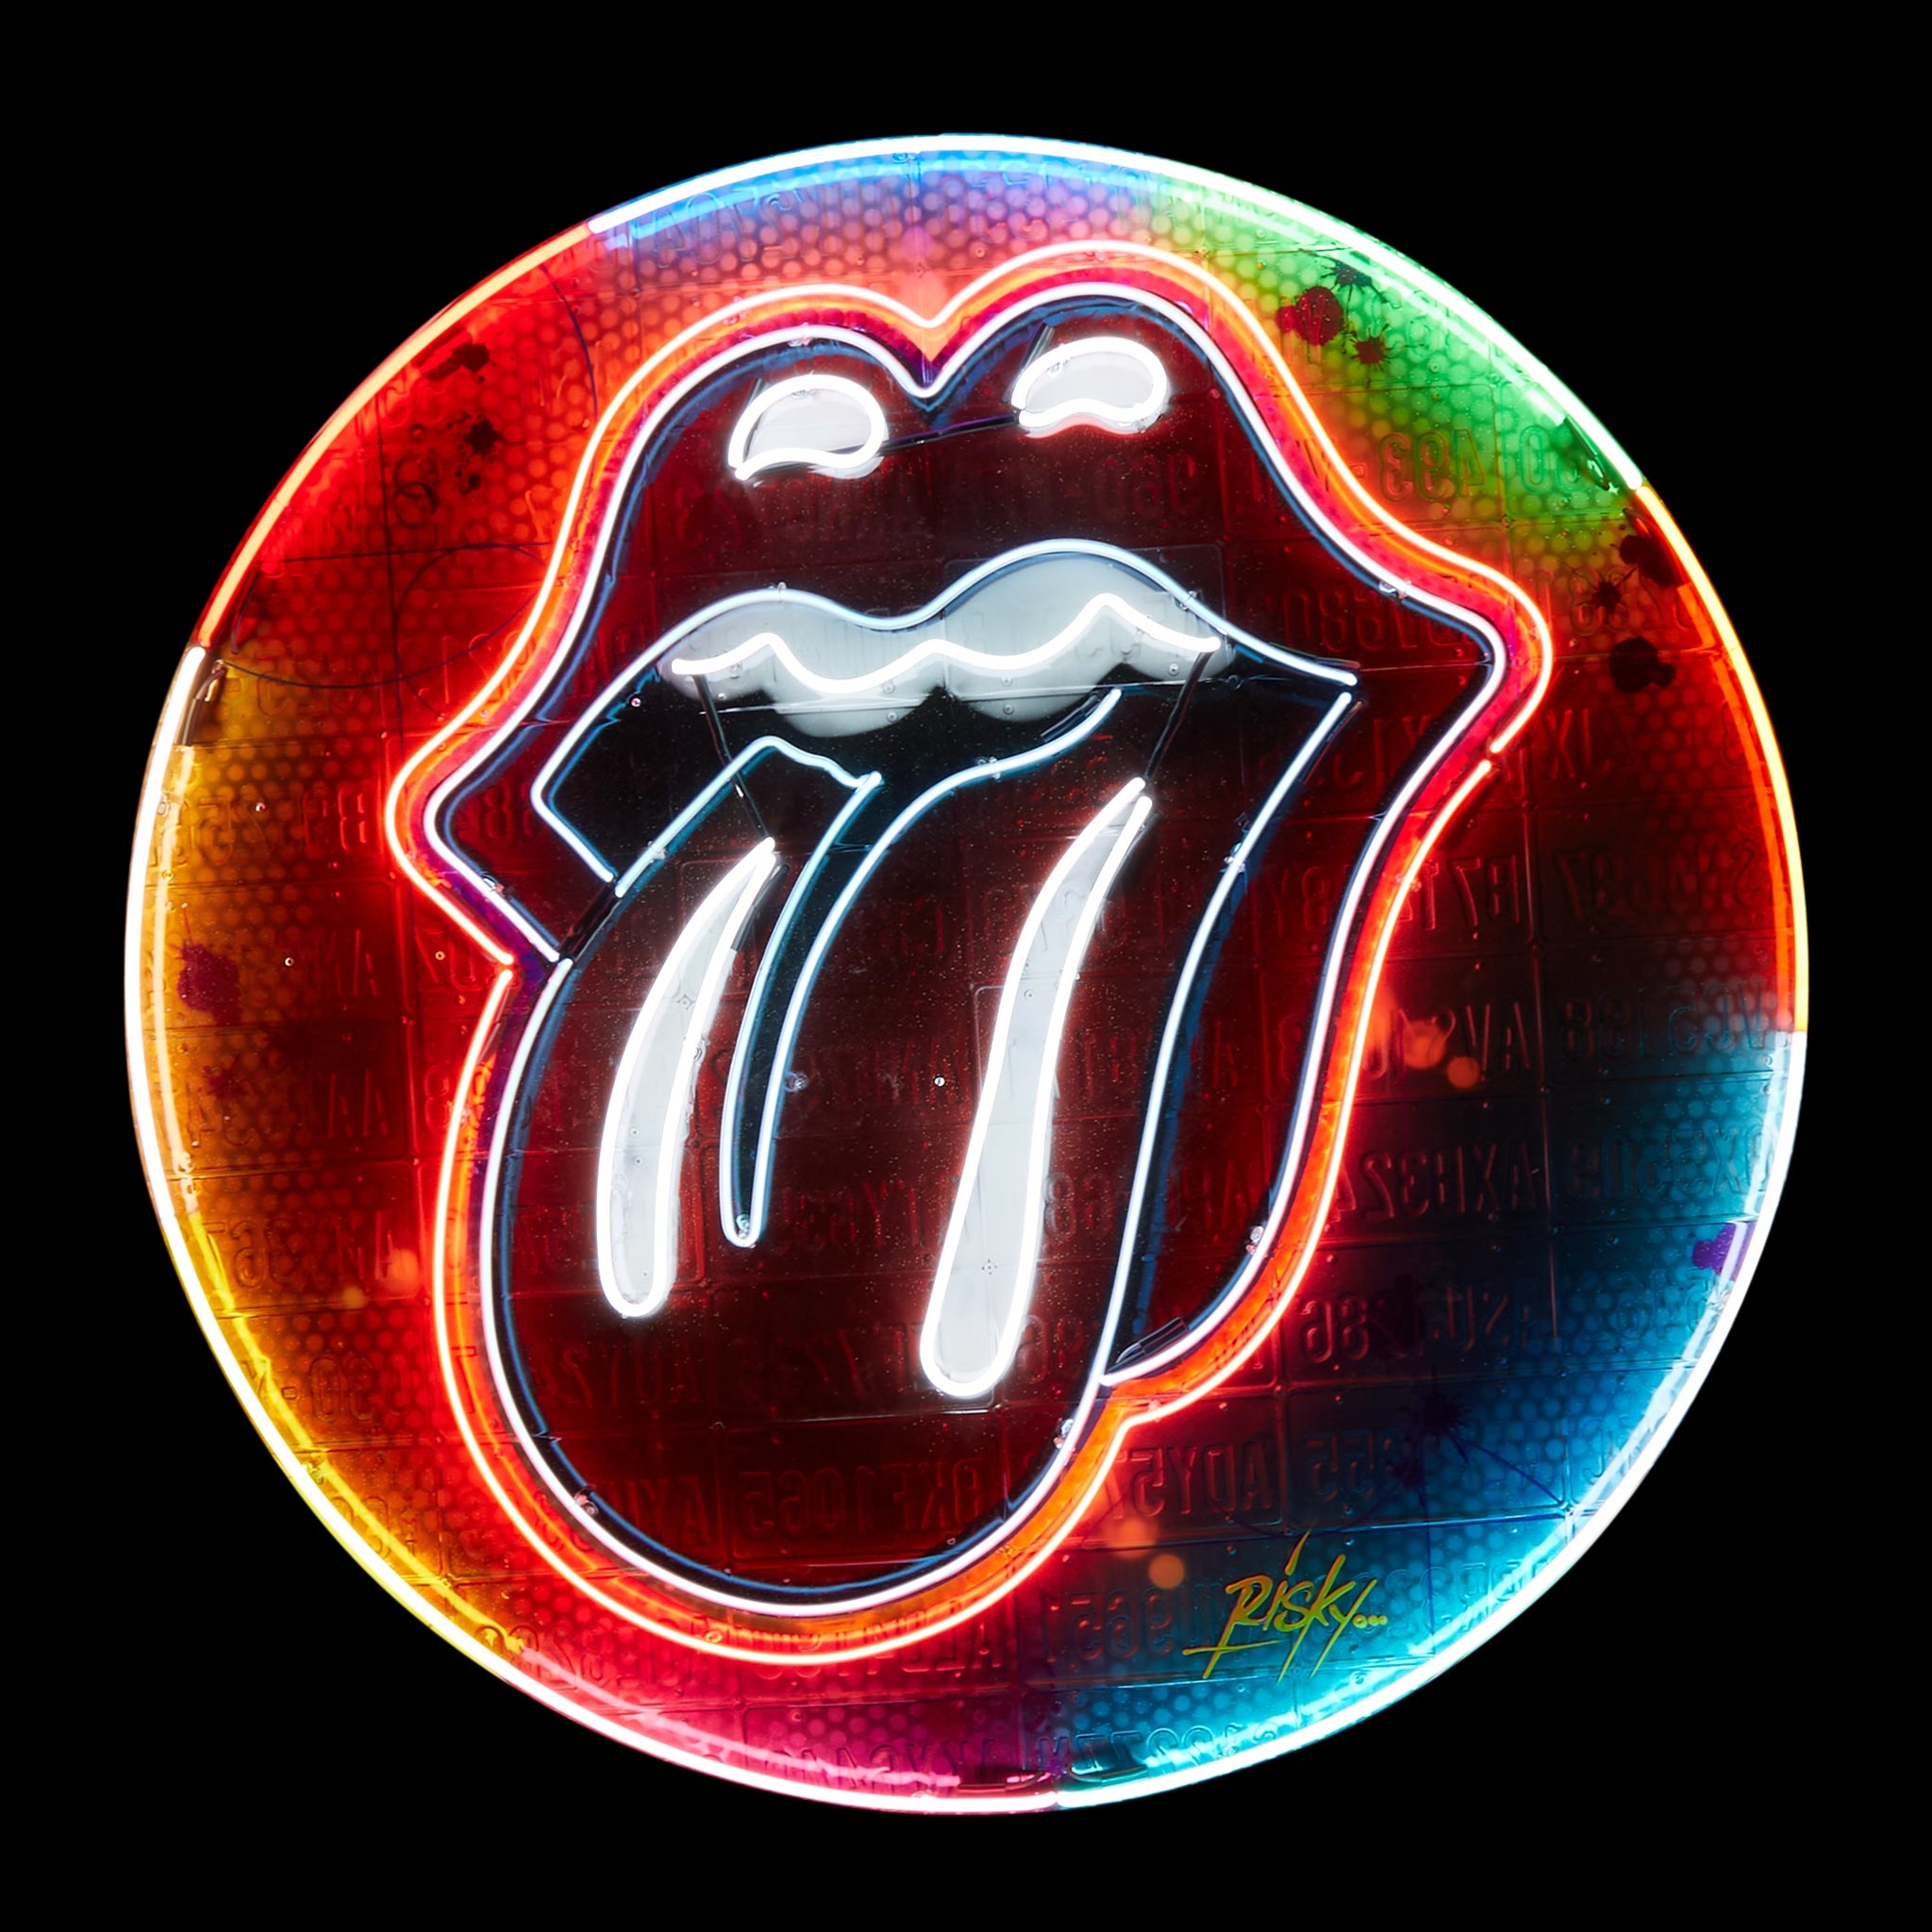 Artwork by RISK, Neon Rolling Stones Tongue, Made of plates, resin and neon